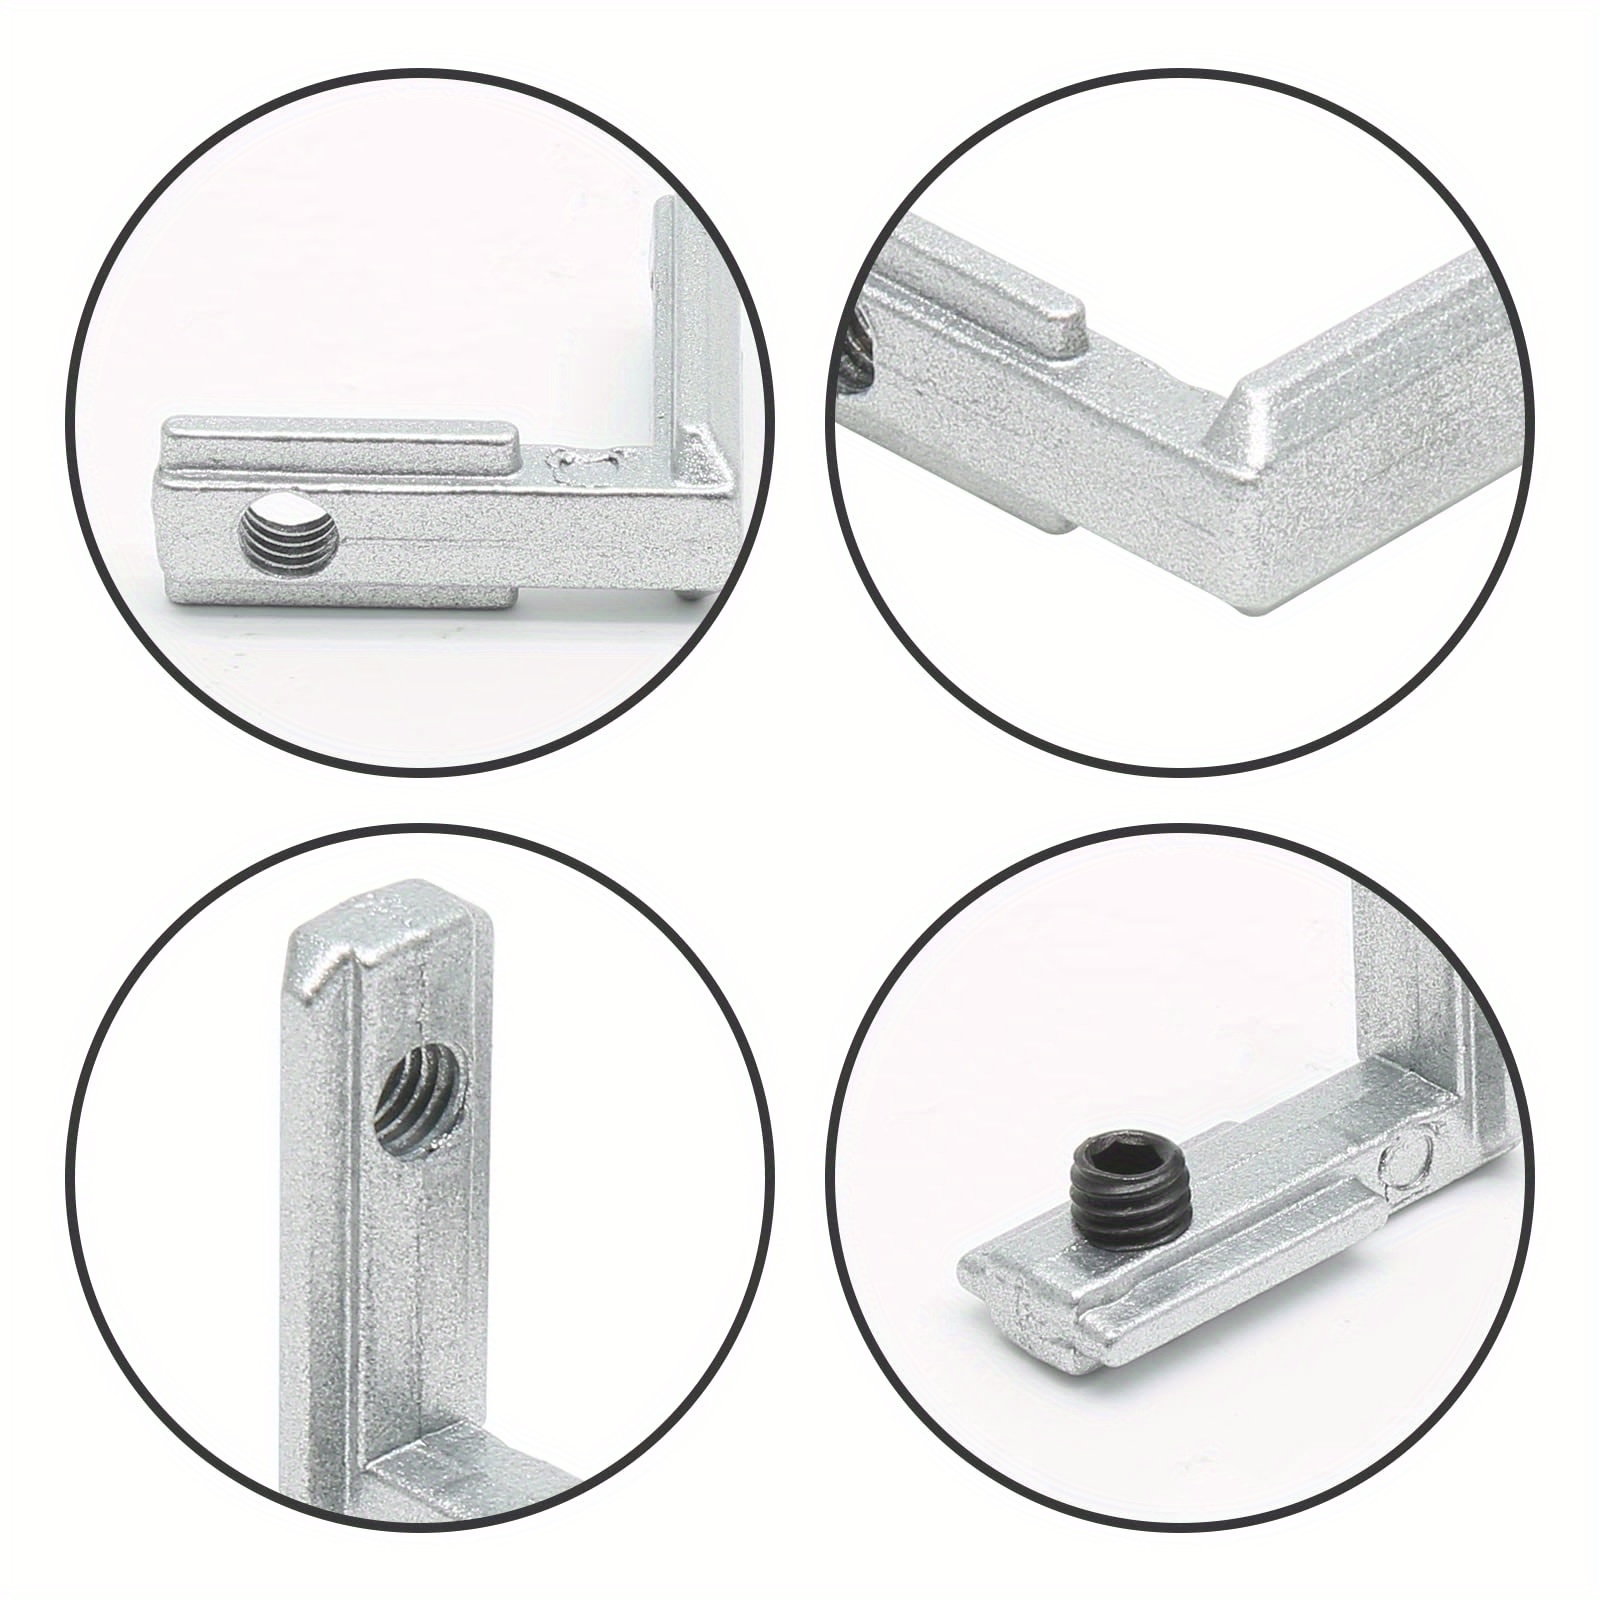 2pc 2020 3030 4040 Sliver Brackets Corner fitting angle aluminum L  Connector for Connector Aluminium Profile CNC Router 